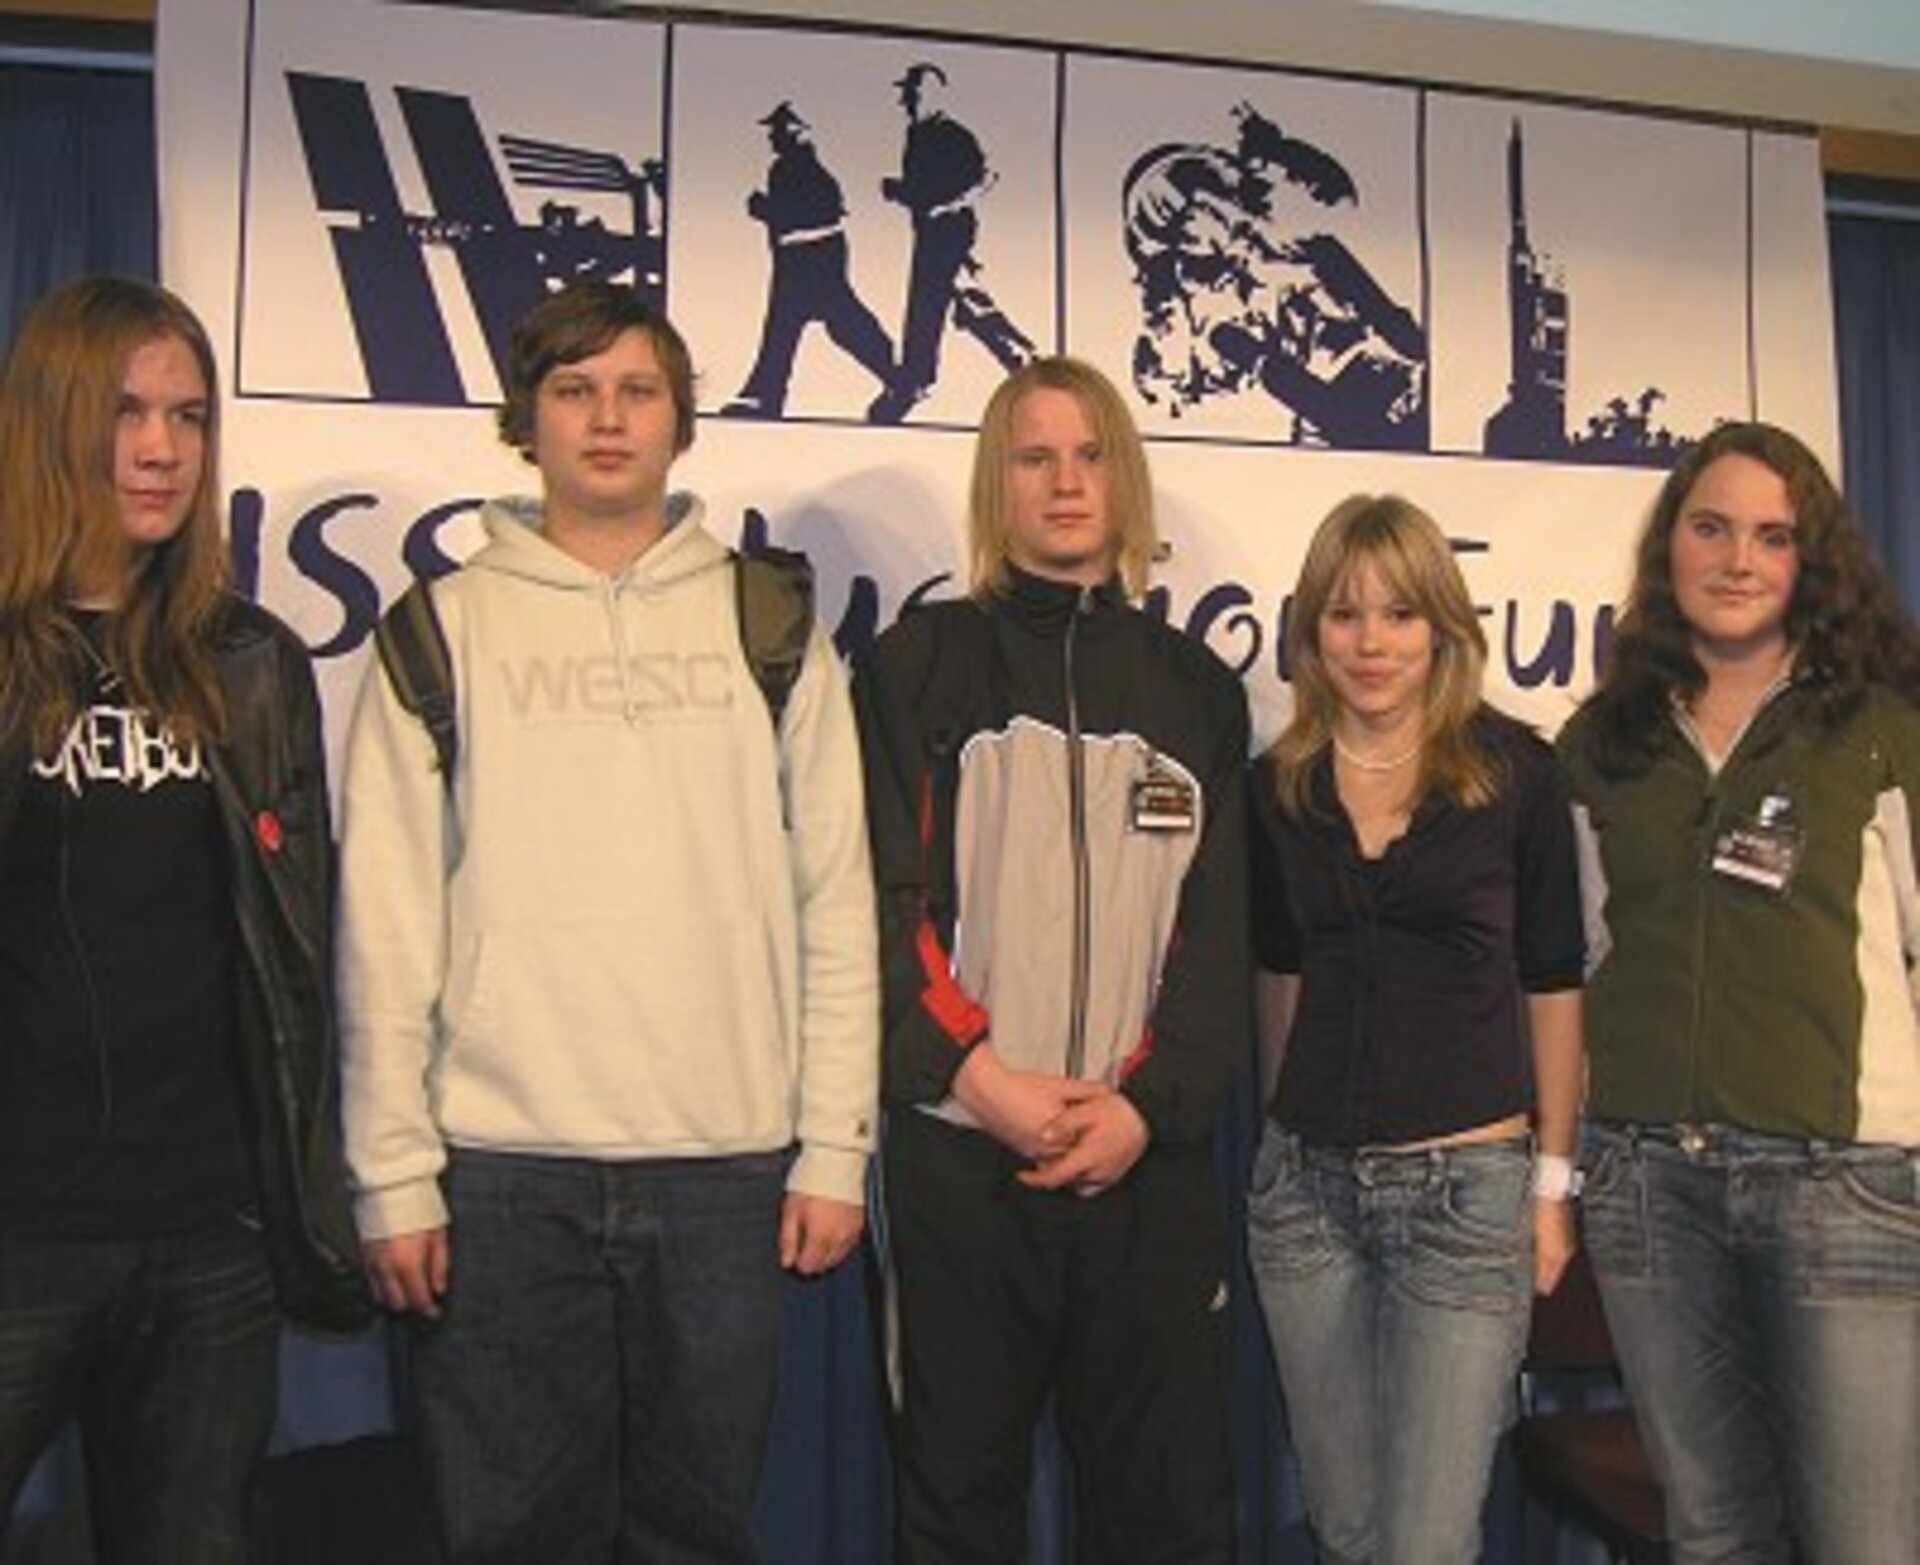 Students from Norway